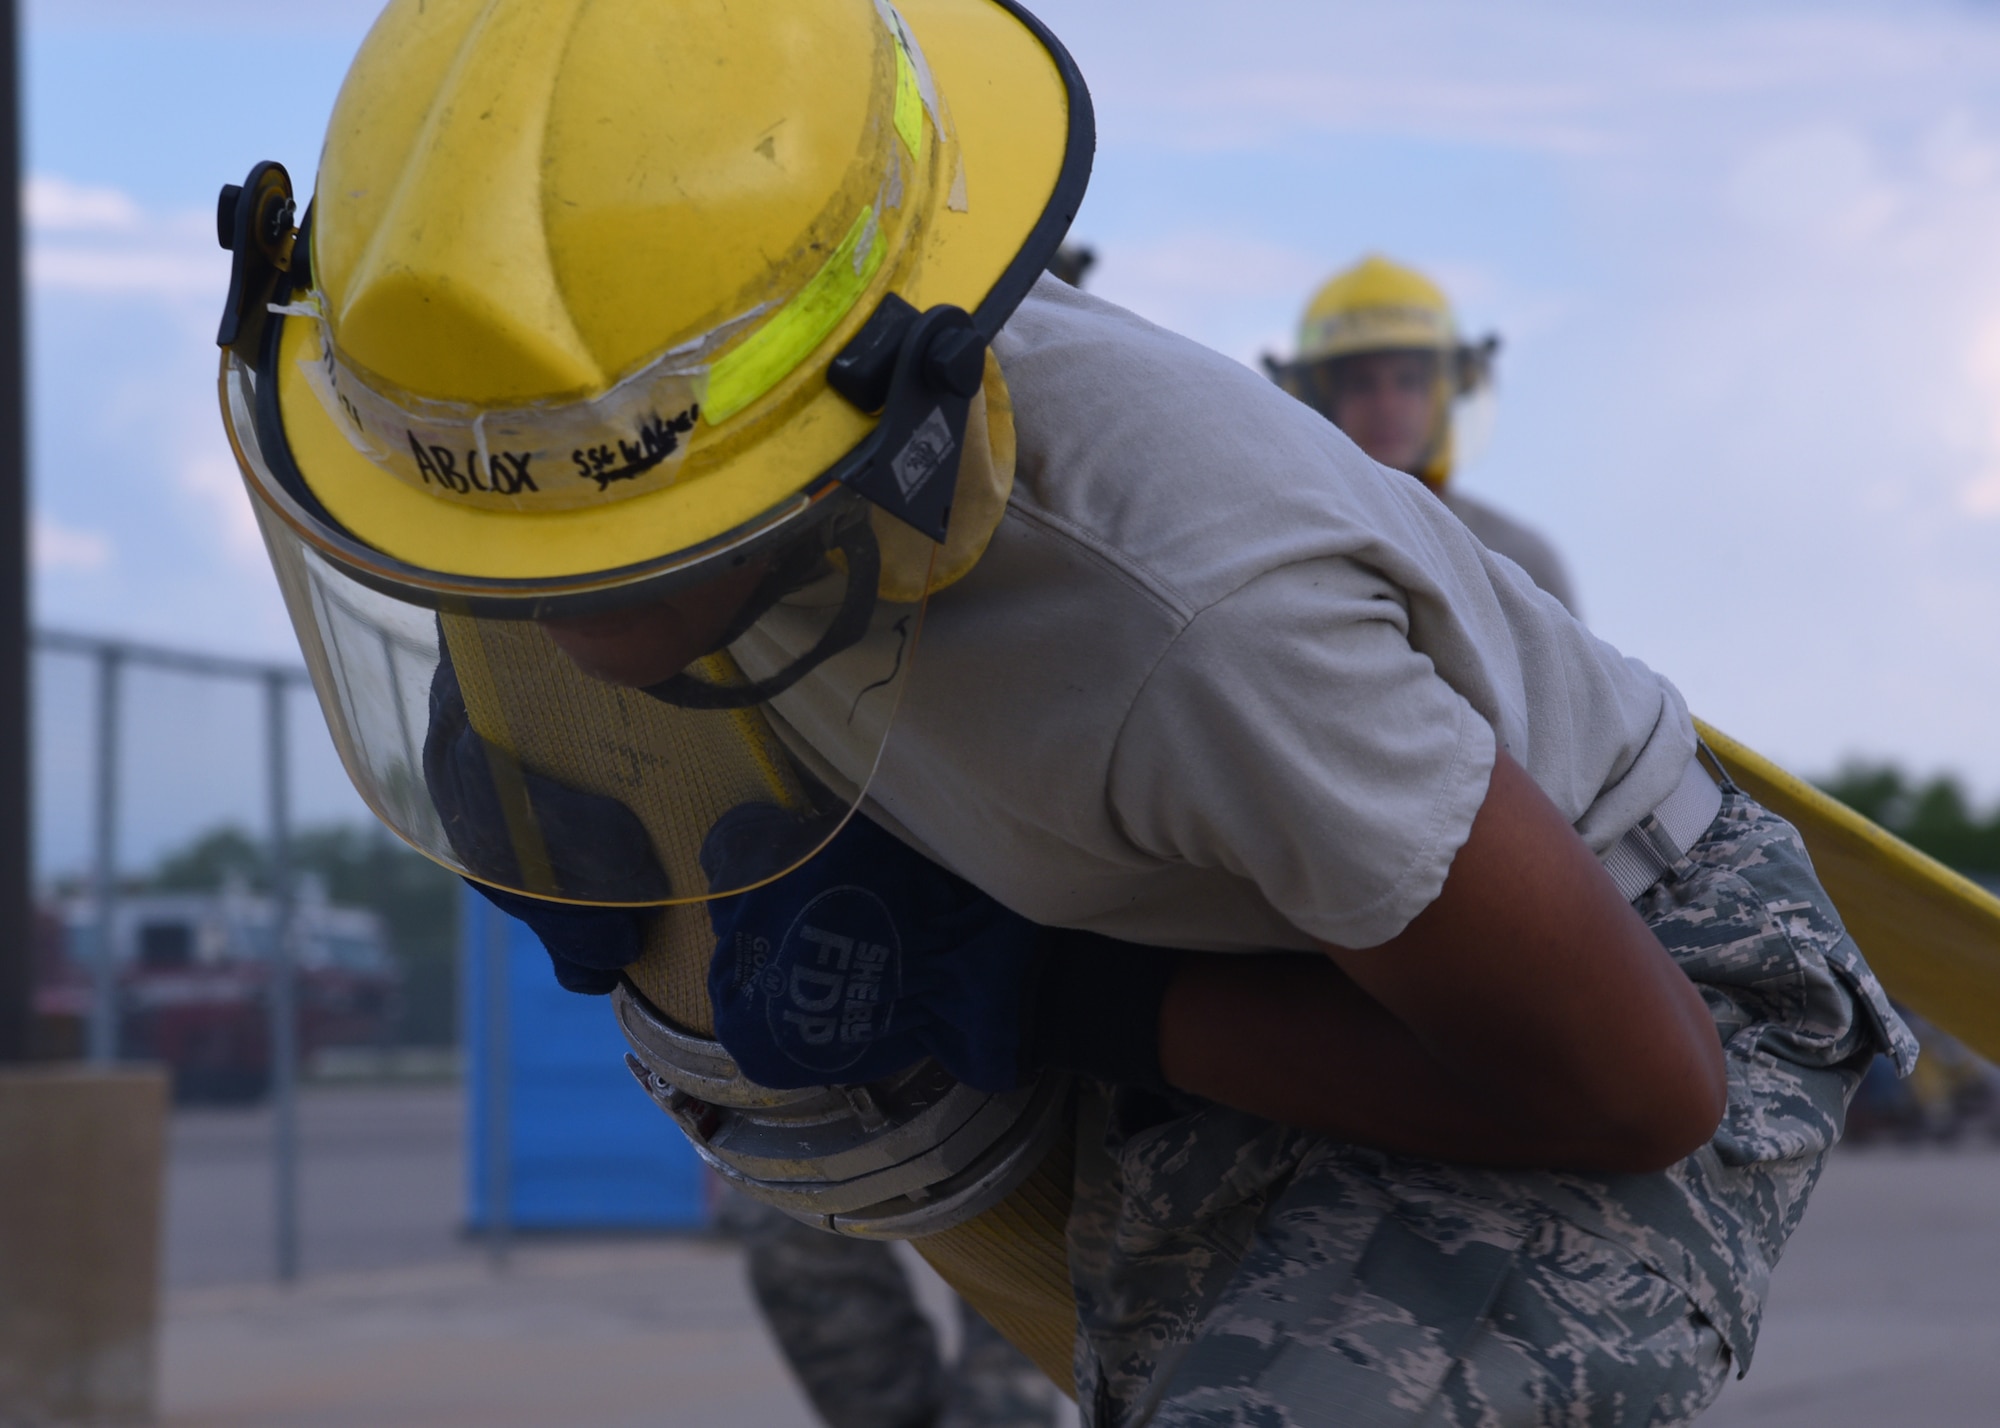 U.S. Air Force Airman Keundra Cox, 312th Training Squadron student, heaves a fire hose out of a fire truck and sprints it to a marked location outside the Louis F. Garland Department of Defense Fire Academy on Goodfellow Air Force Base, Texas, July 11, 2019. Cox and his classmates took turns running the fire hose, learning the strength, endurance and momentum needed to get the hose 100 yards, much like they will outside of the technical training environment. (U.S. Air Force Photo by Airman 1st Class Abbey Rieves/Released)